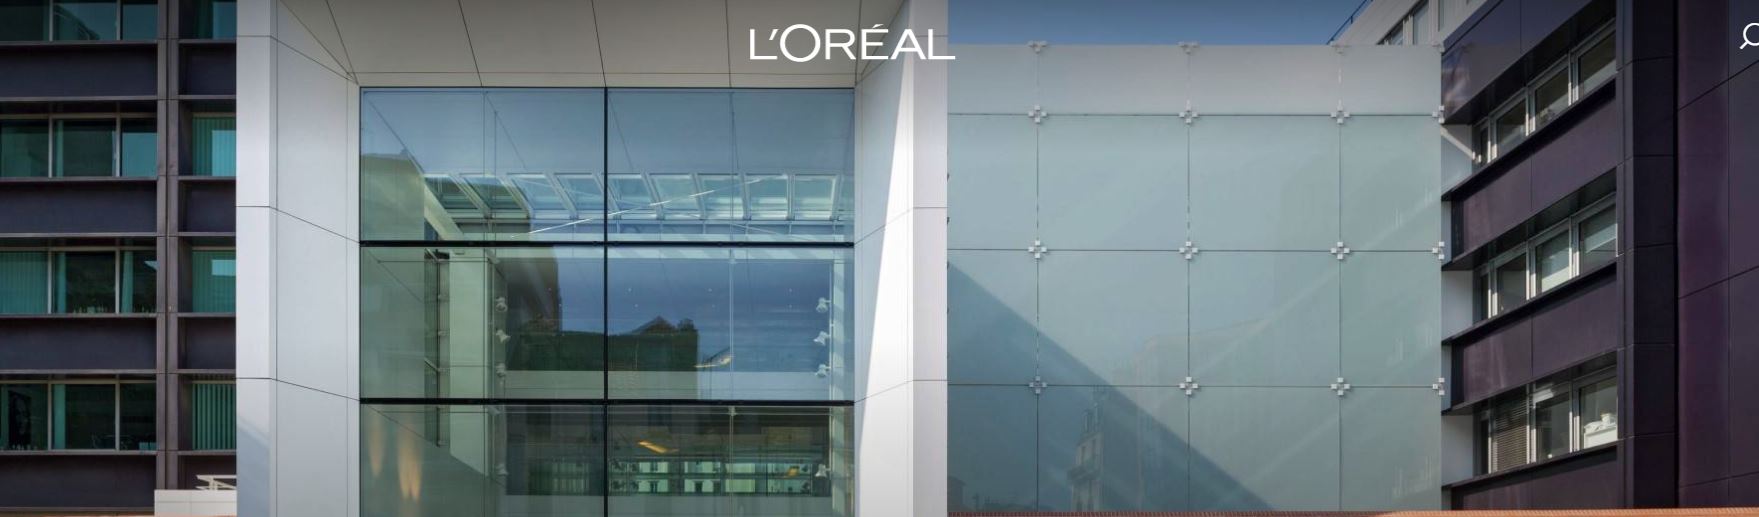 L’Oreal Selects LSA Global for Sales Territory Planning and Management